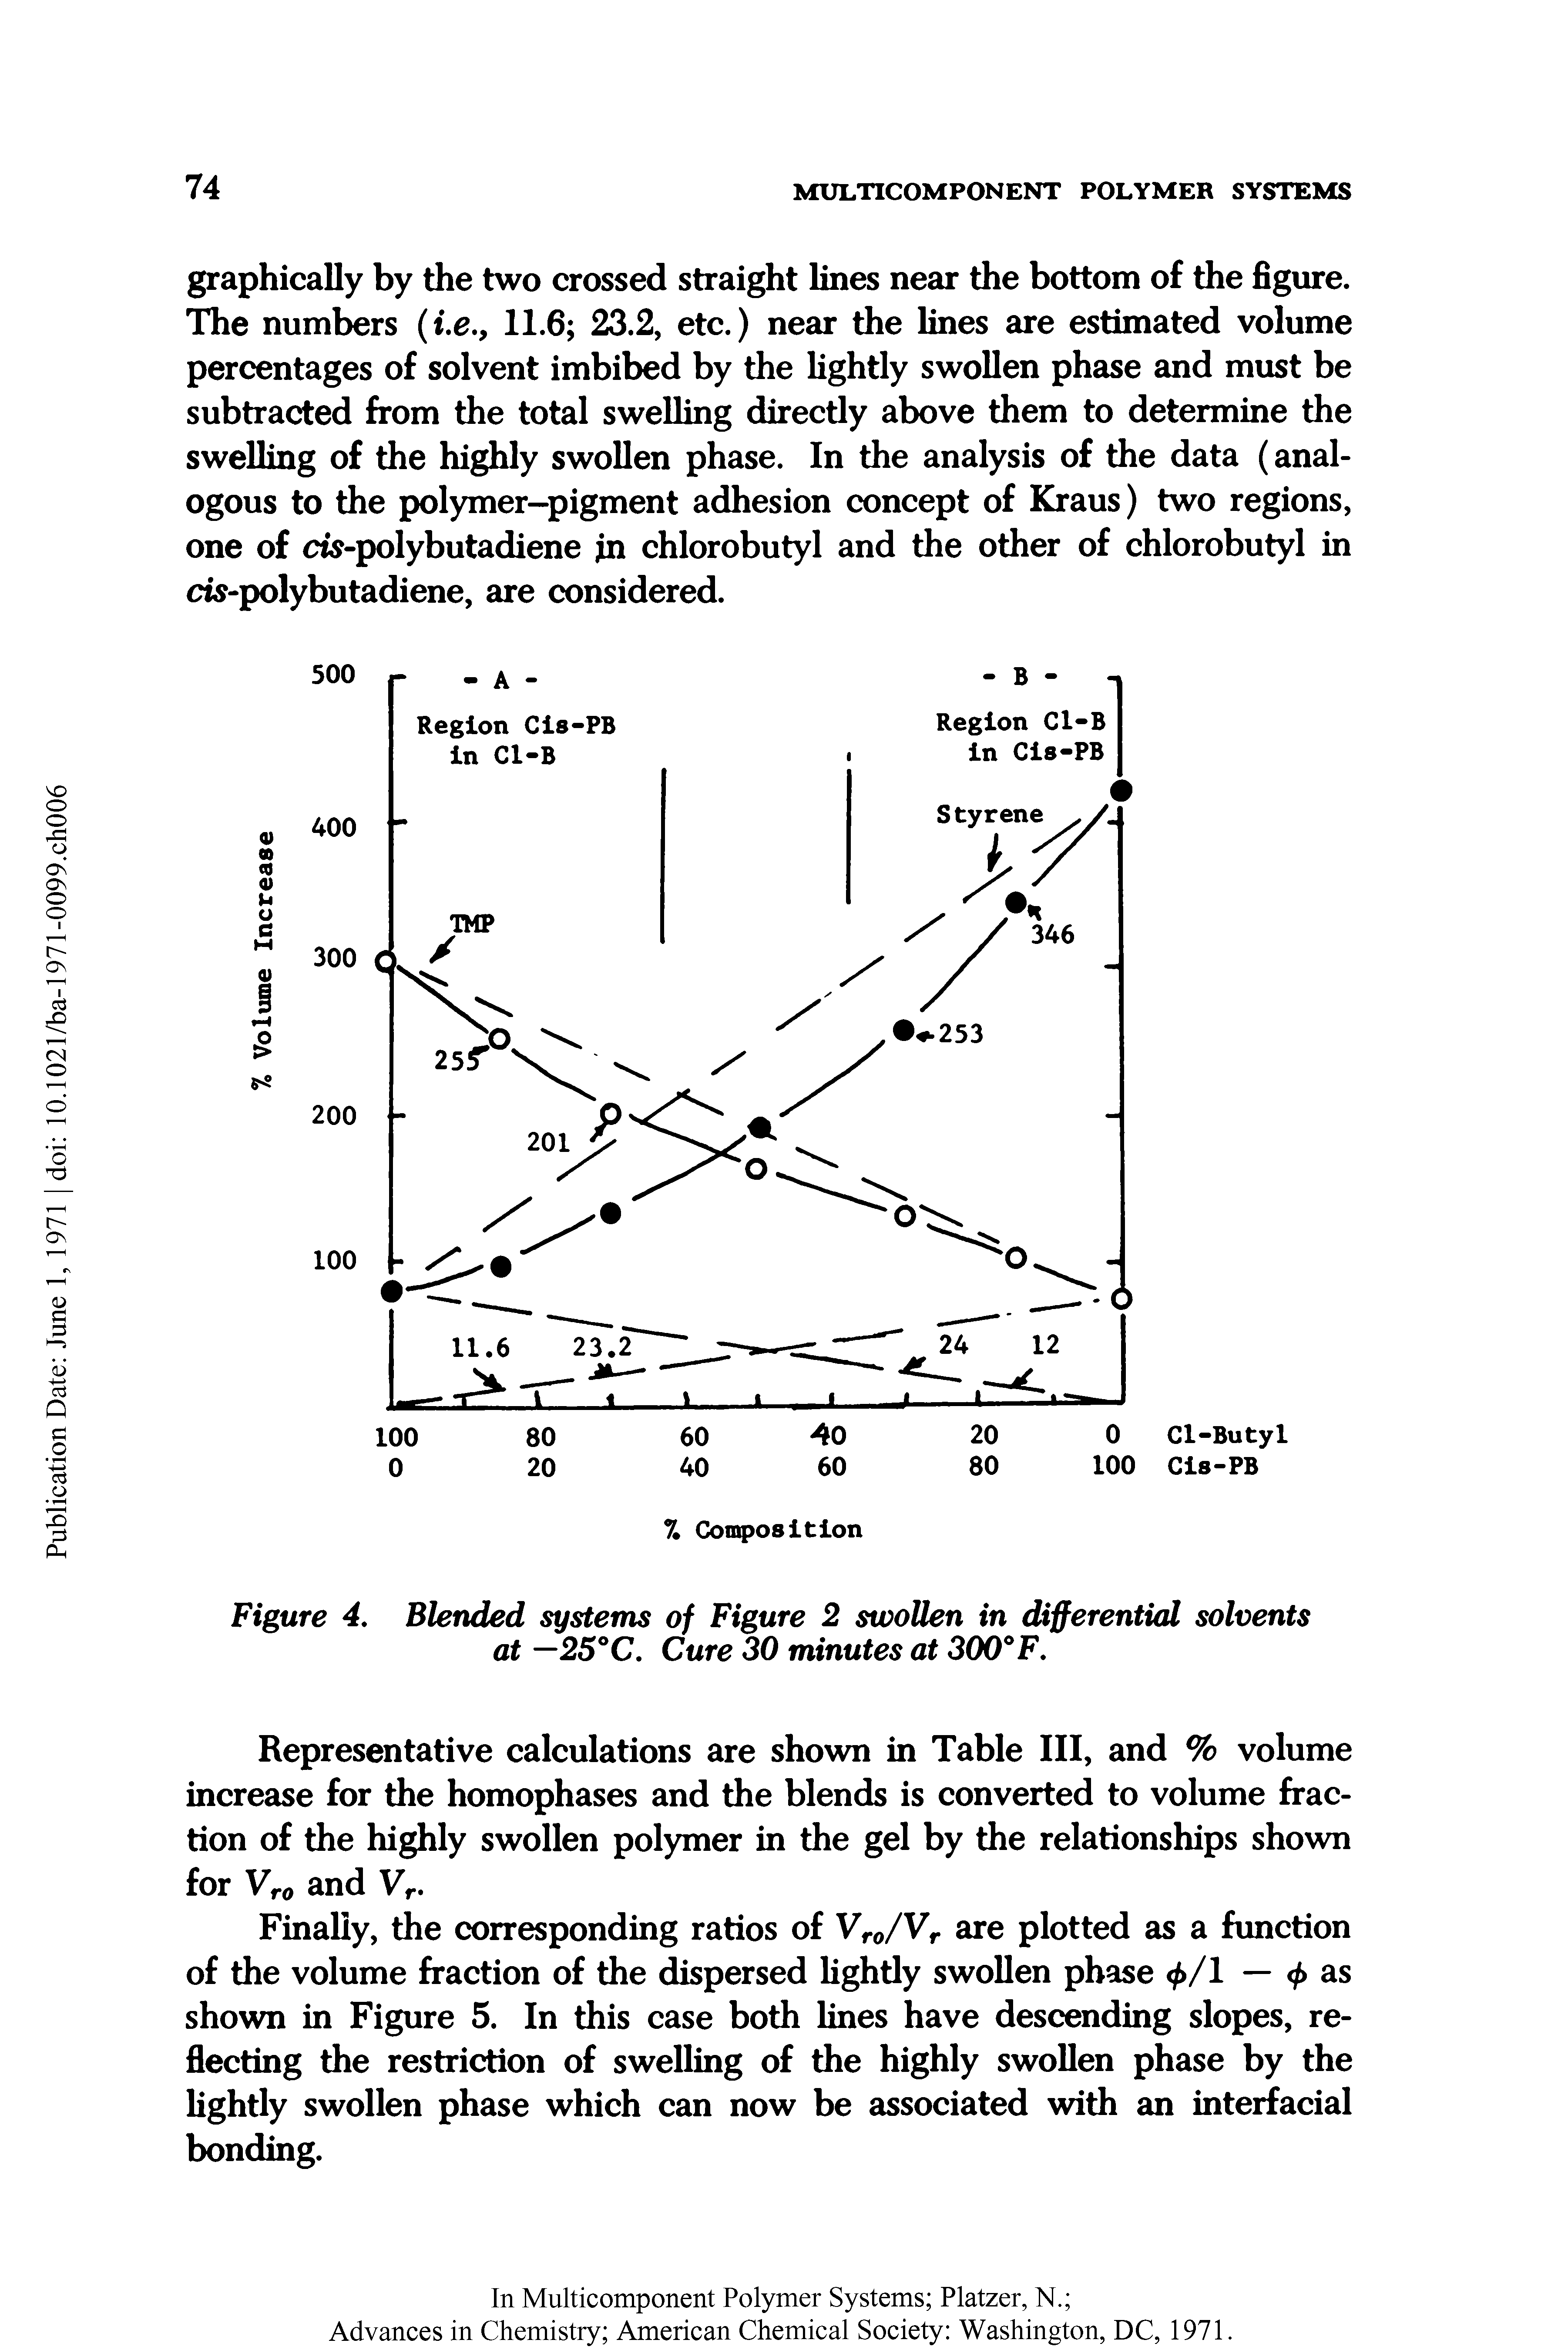 Figure 4. Blended systems of Figure 2 swollen in differential solvents at —25°C. Cure 30 minutes at 300°F.